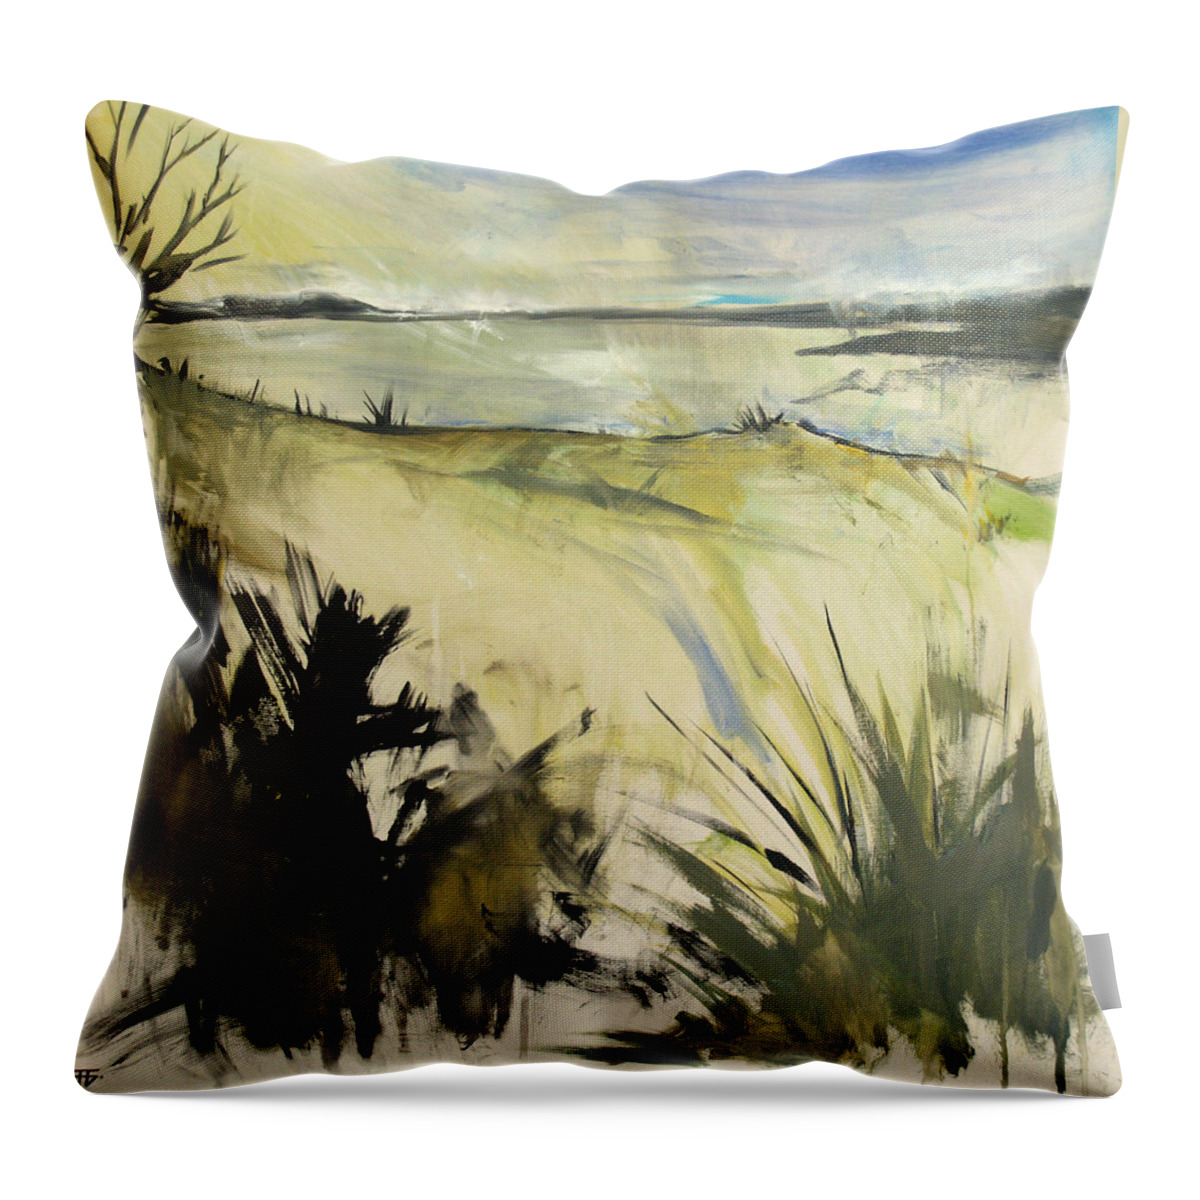  Throw Pillow featuring the painting Ossabaw Swamp Thoughts by John Gholson